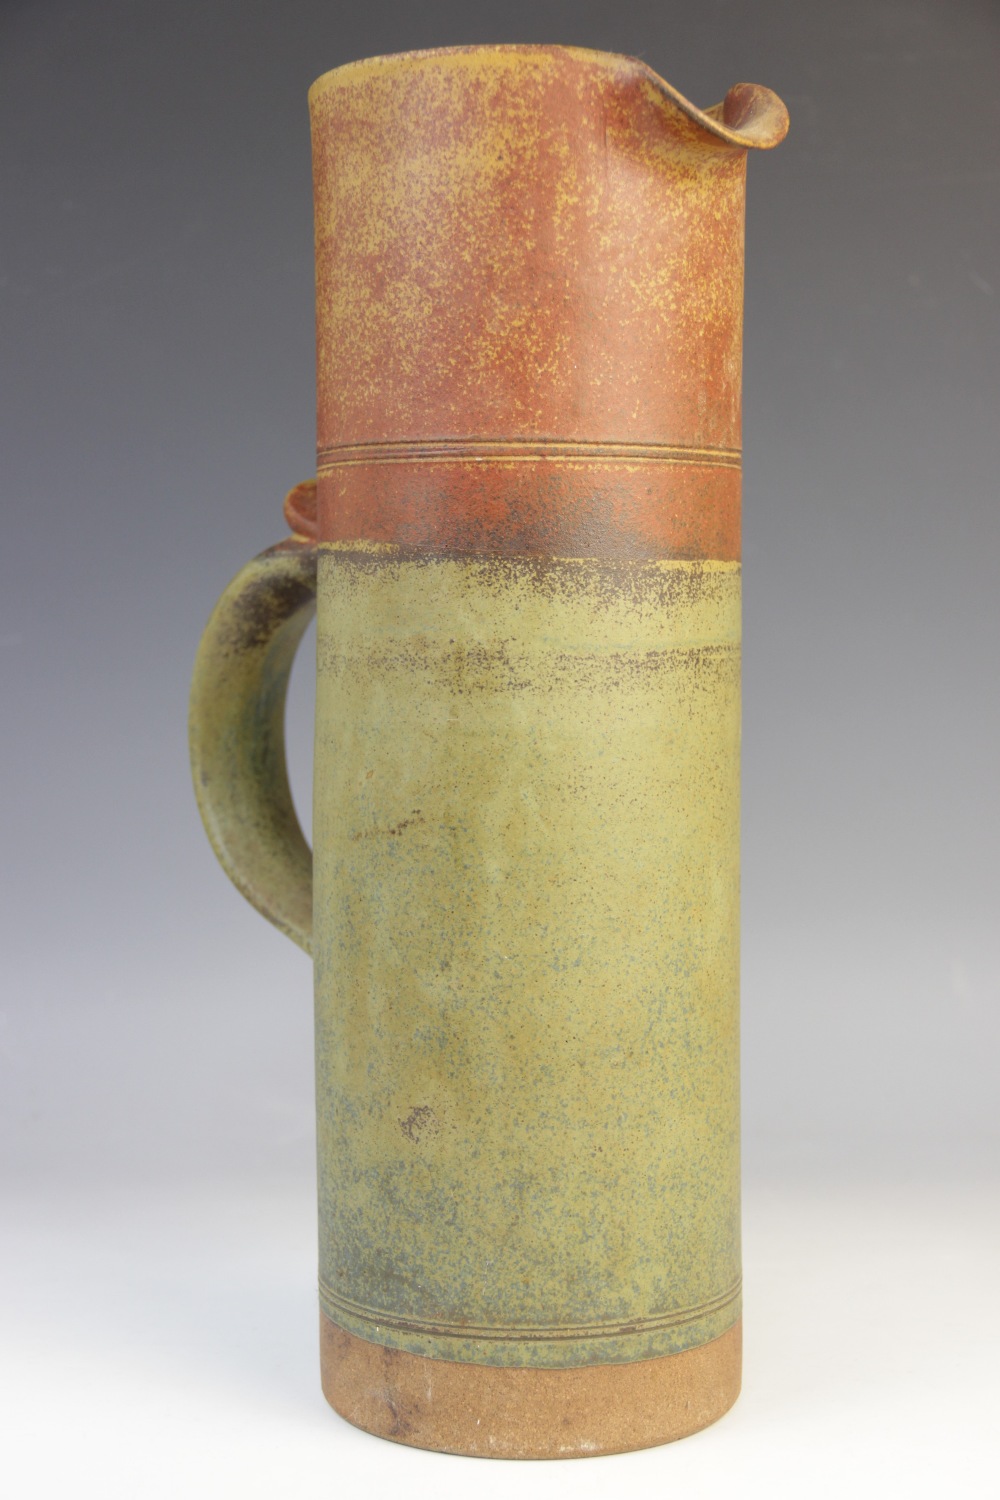 A Robin Welch (British, 1936-2019) cylindrical stoneware ewer, applied loop handle with